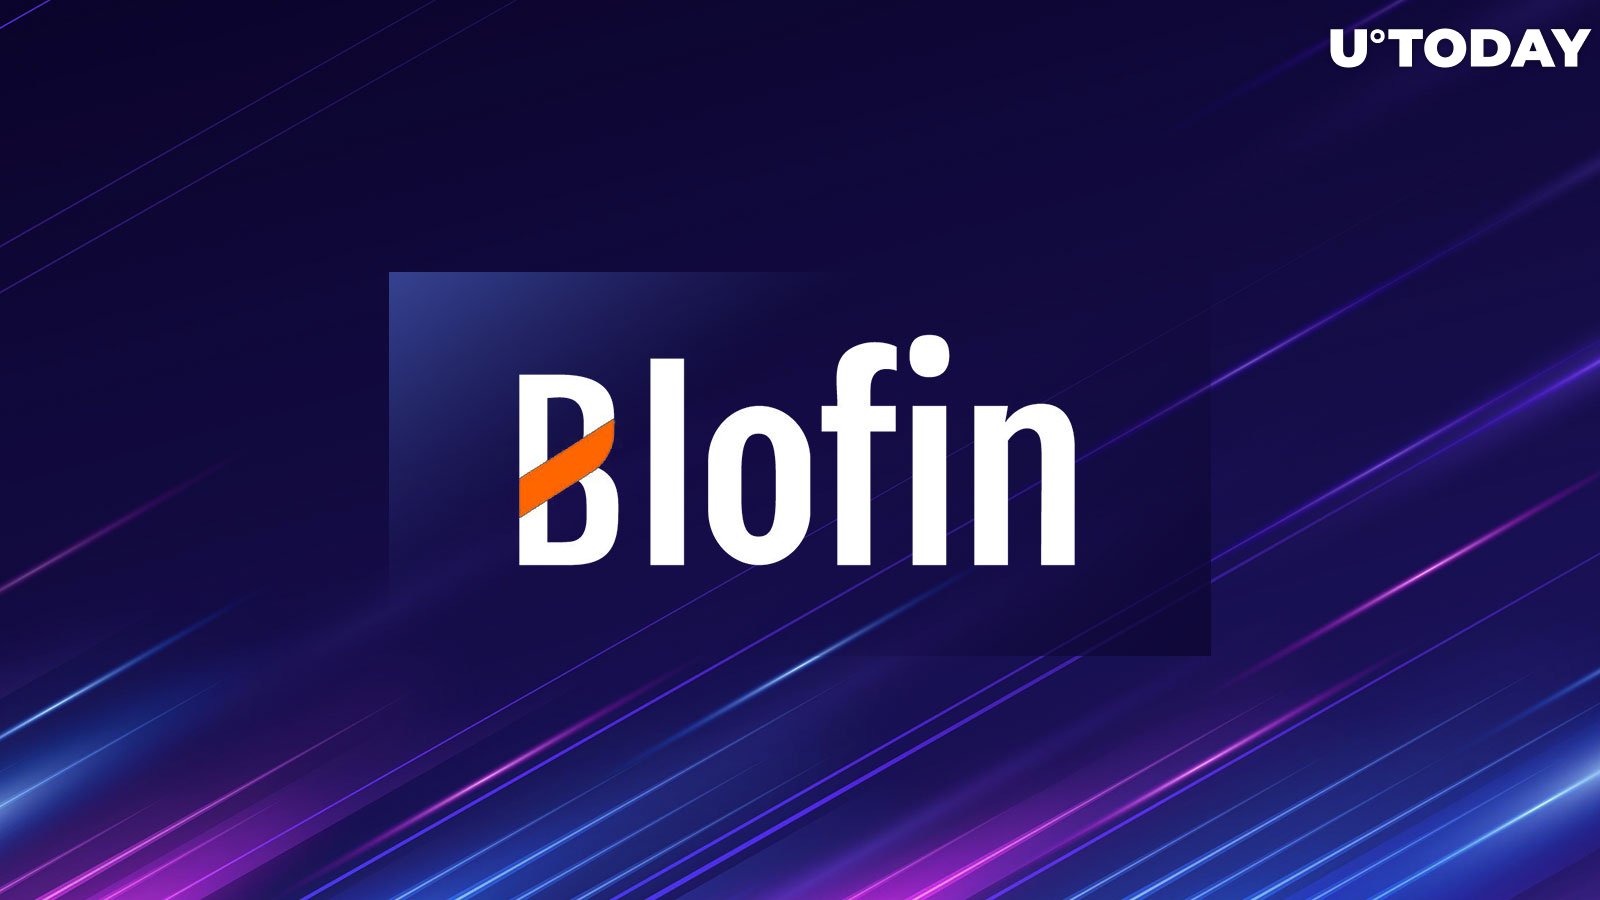 Blofin Futures Exchange Launches Copy Trading Module, Welcomes First Users